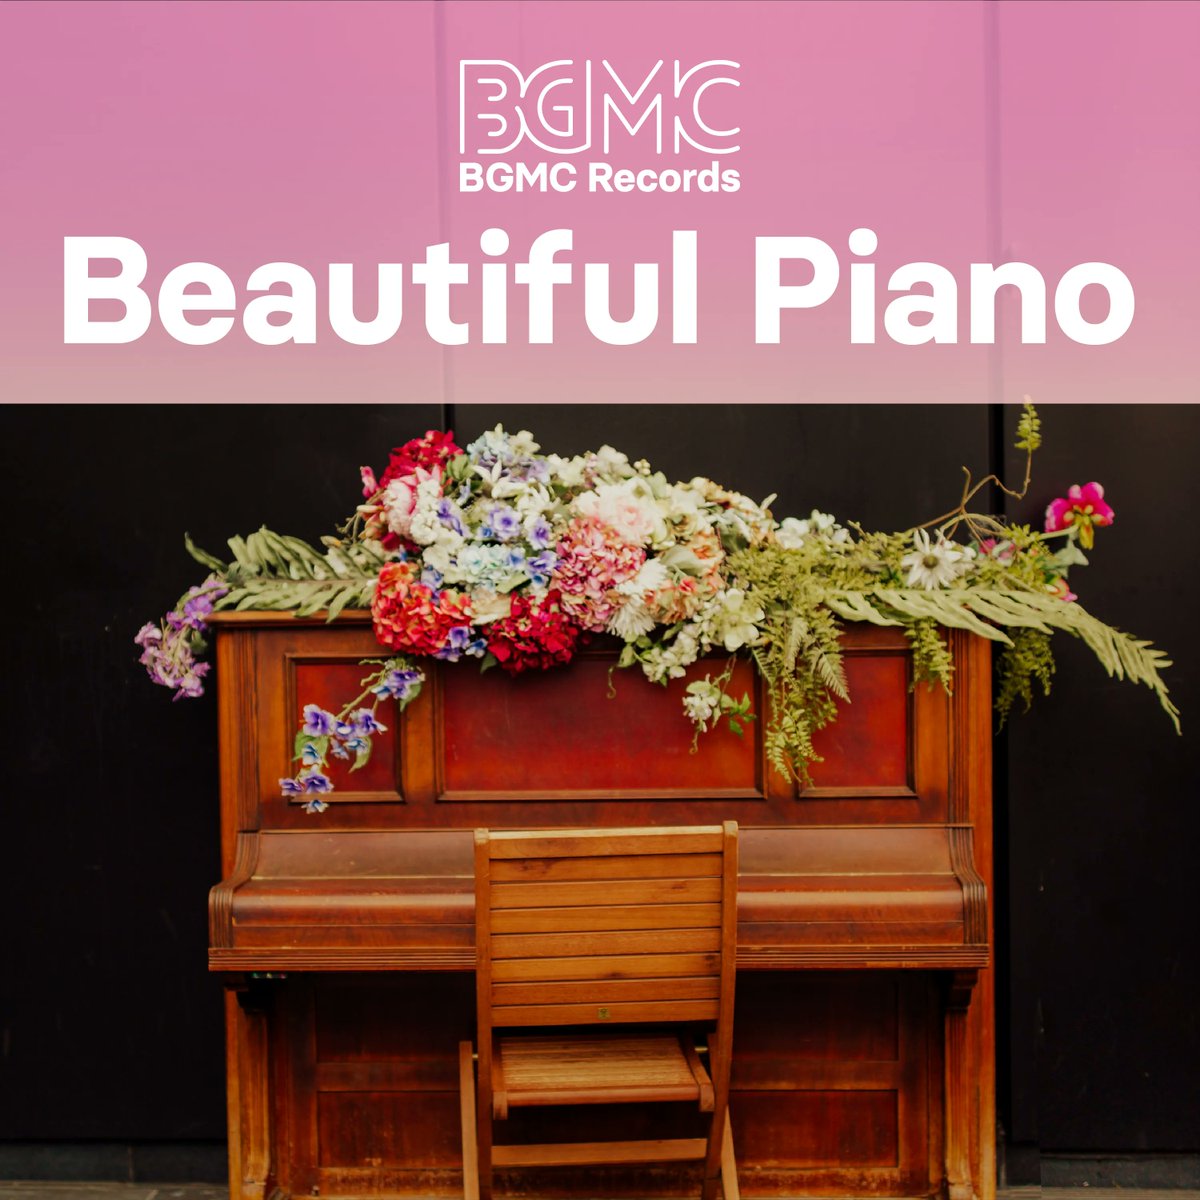 🎶 In honor of National Piano Month, we present to you the 'Beautiful Piano' playlist by BGMC Records.👉 bgmc.lnk.to/4UrnIfHw

#EverydayMusic #NationalPianoMonth #SoothingSounds #PianoPlaylist #BGMC #UnwindWithMusic #LovePiano #ListenNow #FeaturedPlaylist #PianoJoy #MusicHeals